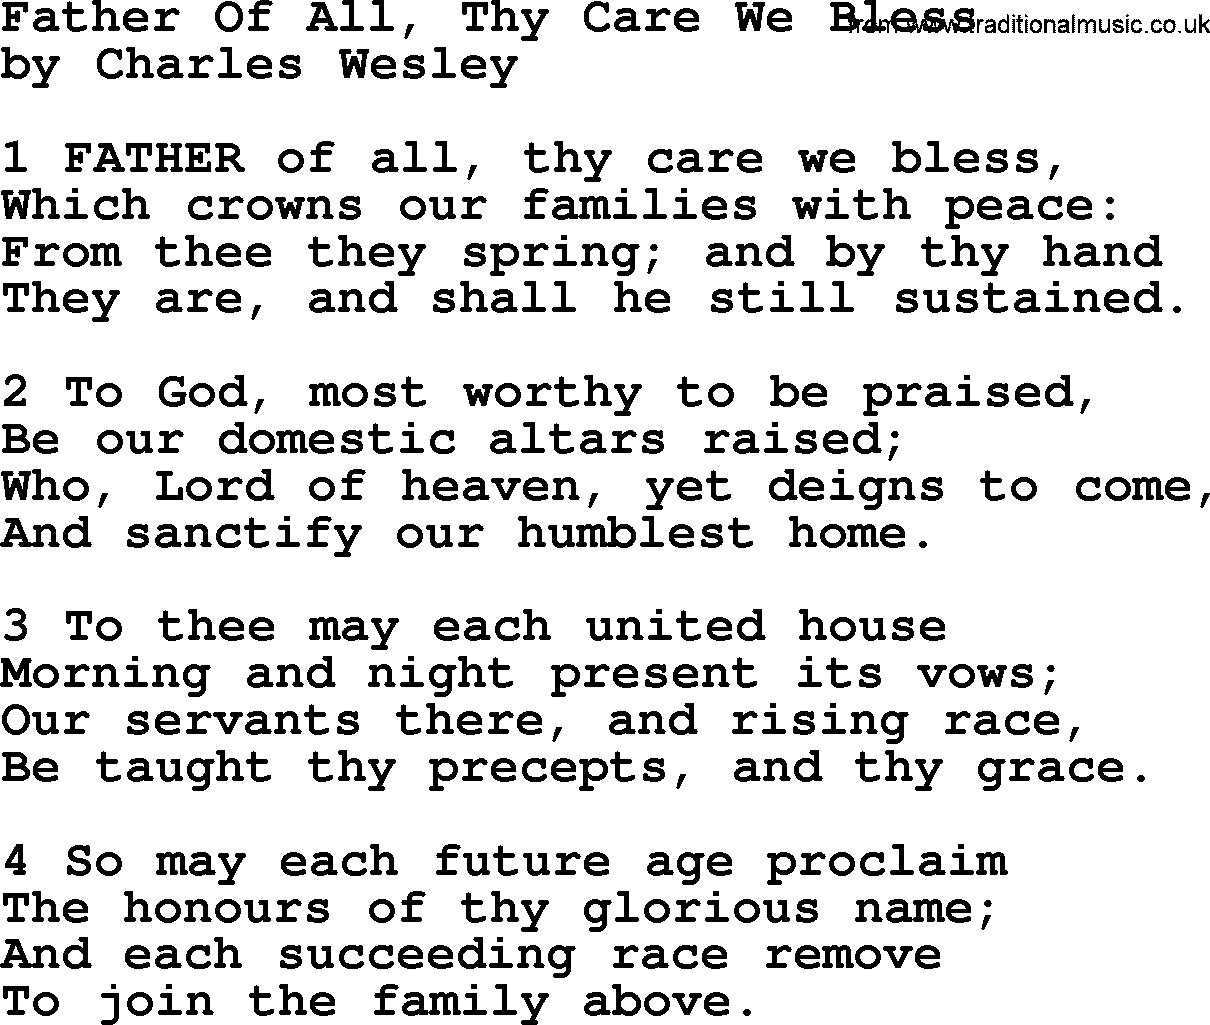 Charles Wesley hymn: Father Of All, Thy Care We Bless, lyrics